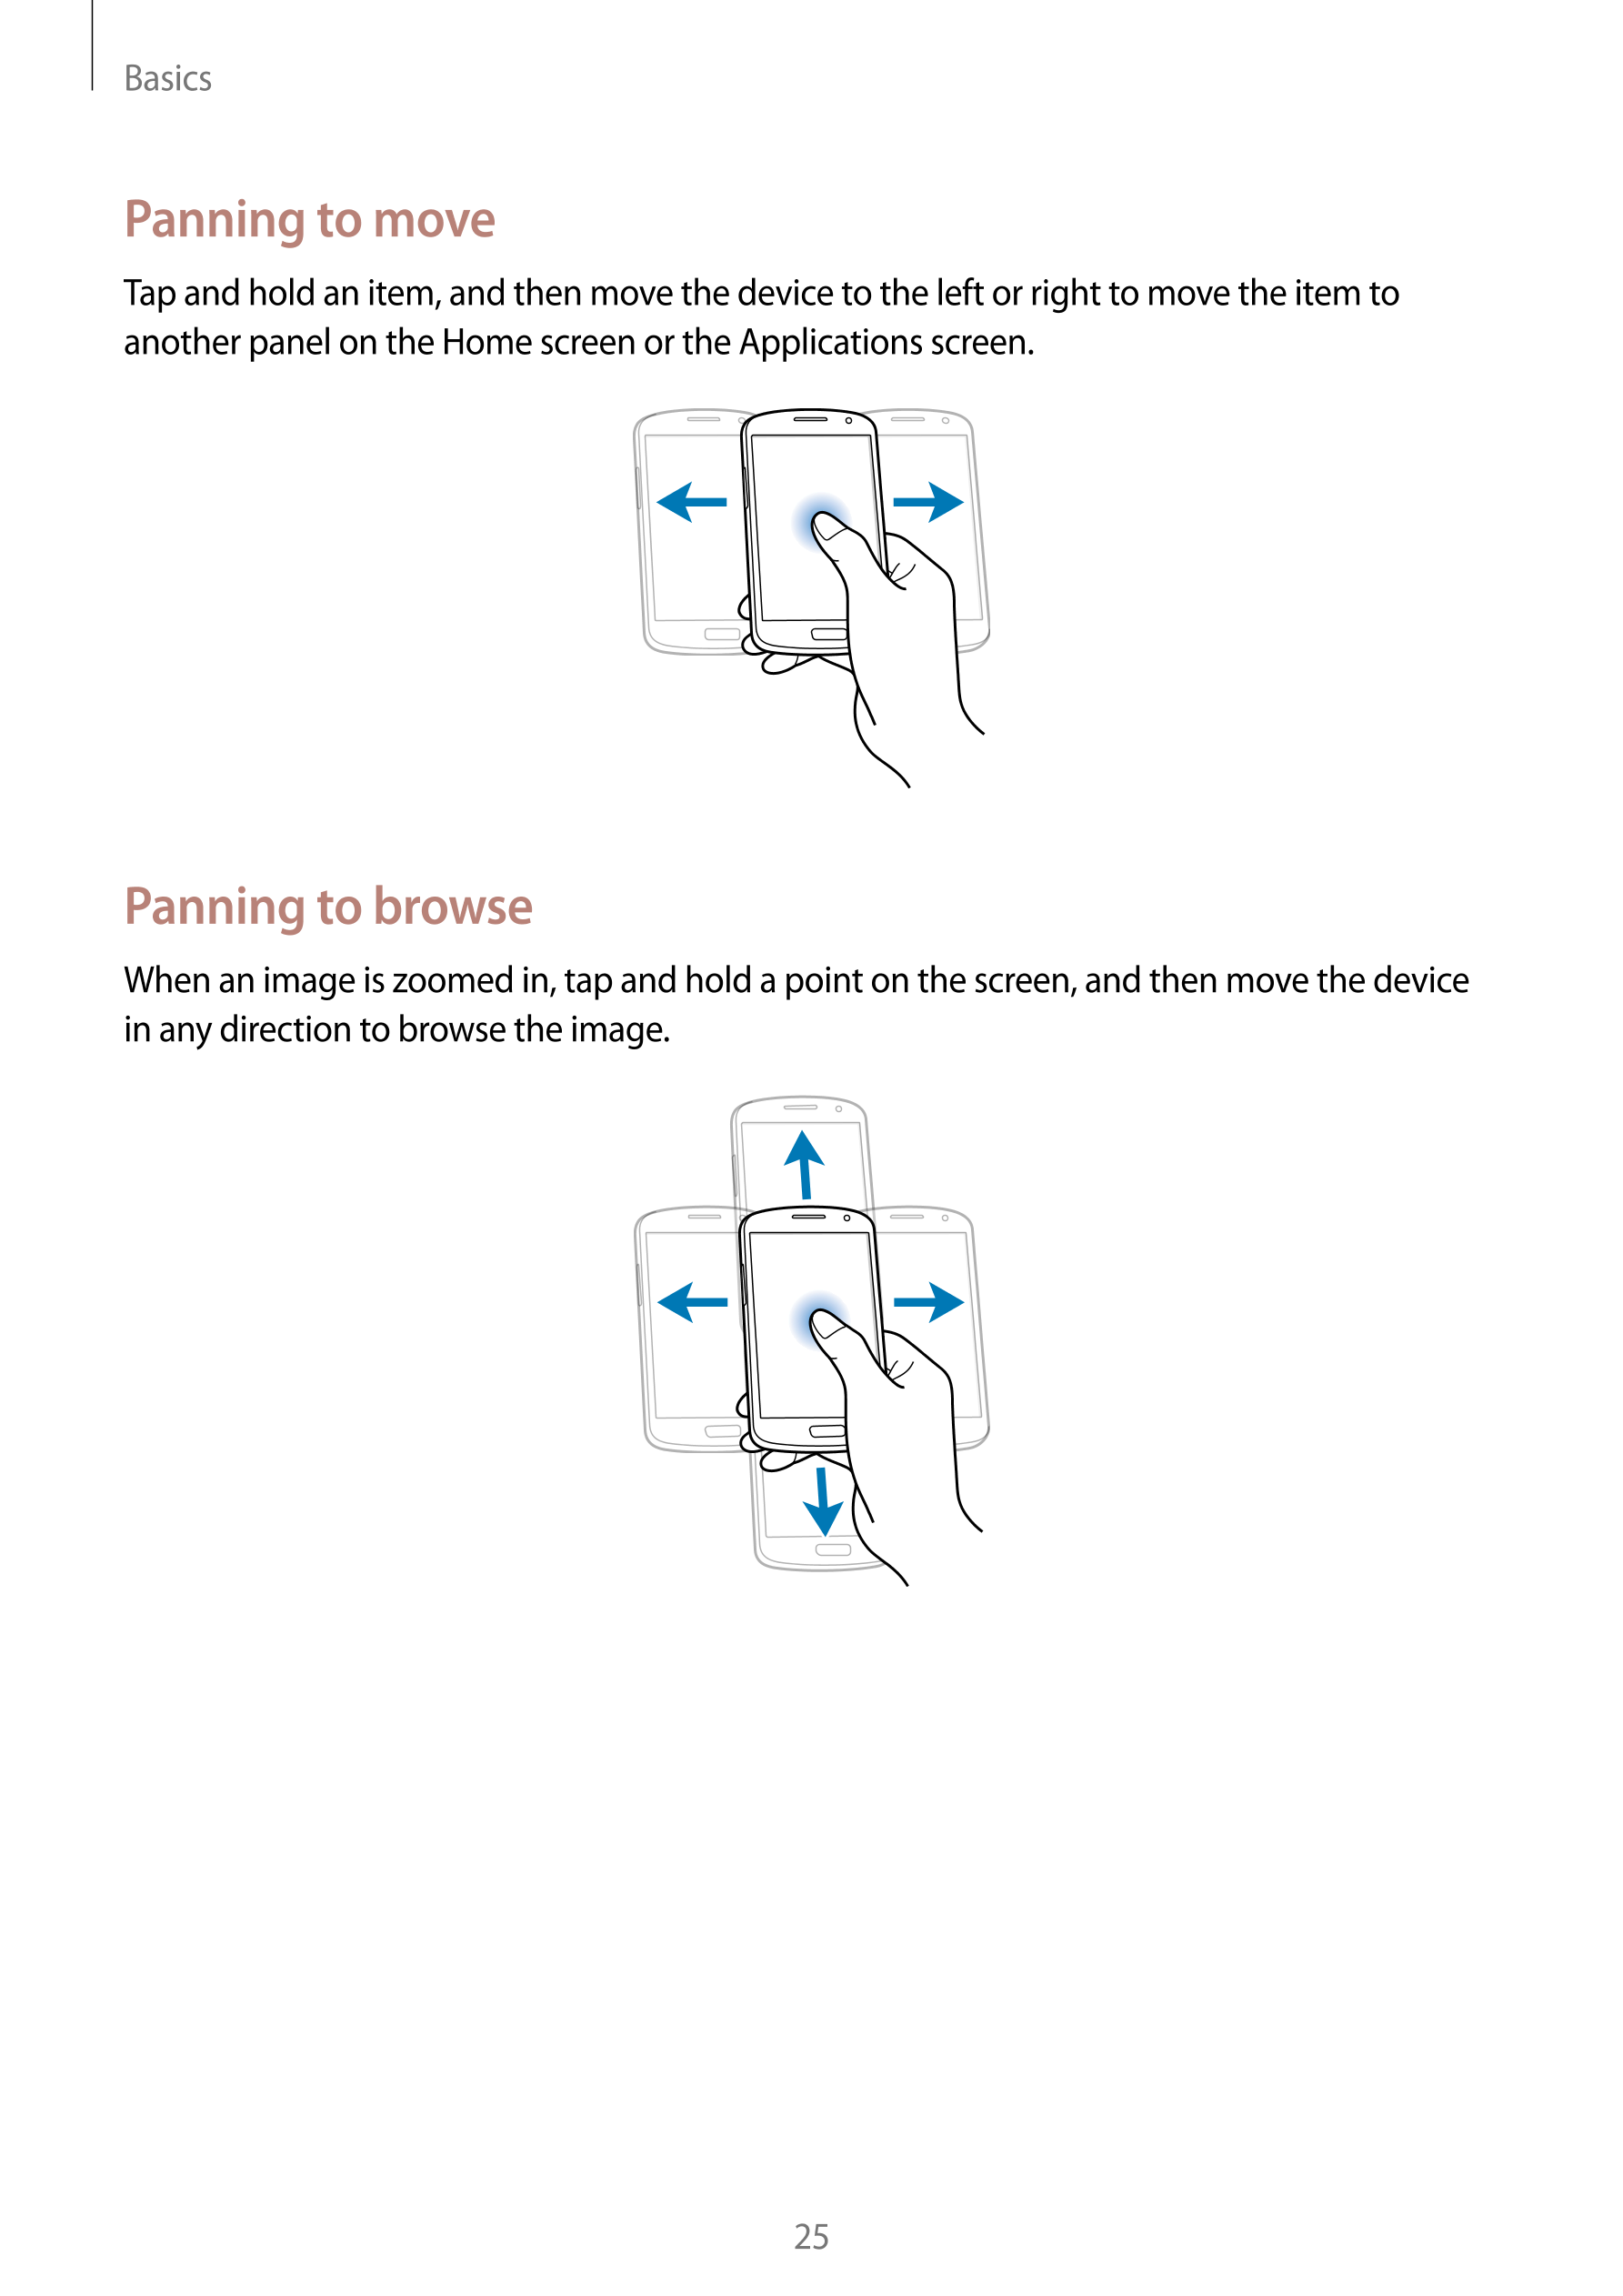 Basics
Panning to move
Tap and hold an item, and then move the device to the left or right to move the item to 
another panel on